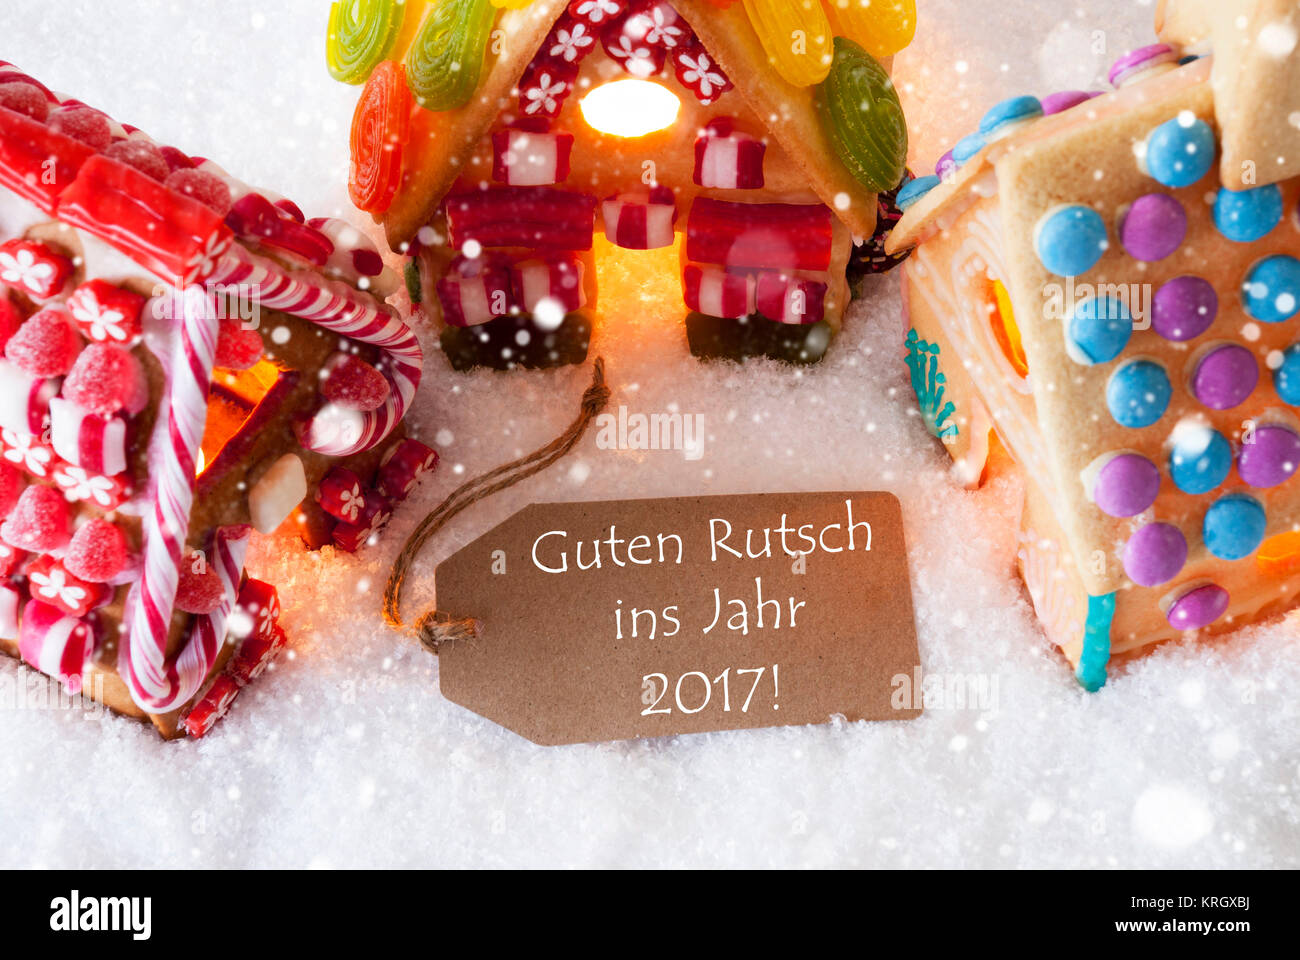 Label With German Text Guten Rutsch Ins Jahr 2017 Means Happy New Year 2017. Colorful Gingerbread House On Snow And Snowflakes. Christmas Card For Seasons Greetings Stock Photo